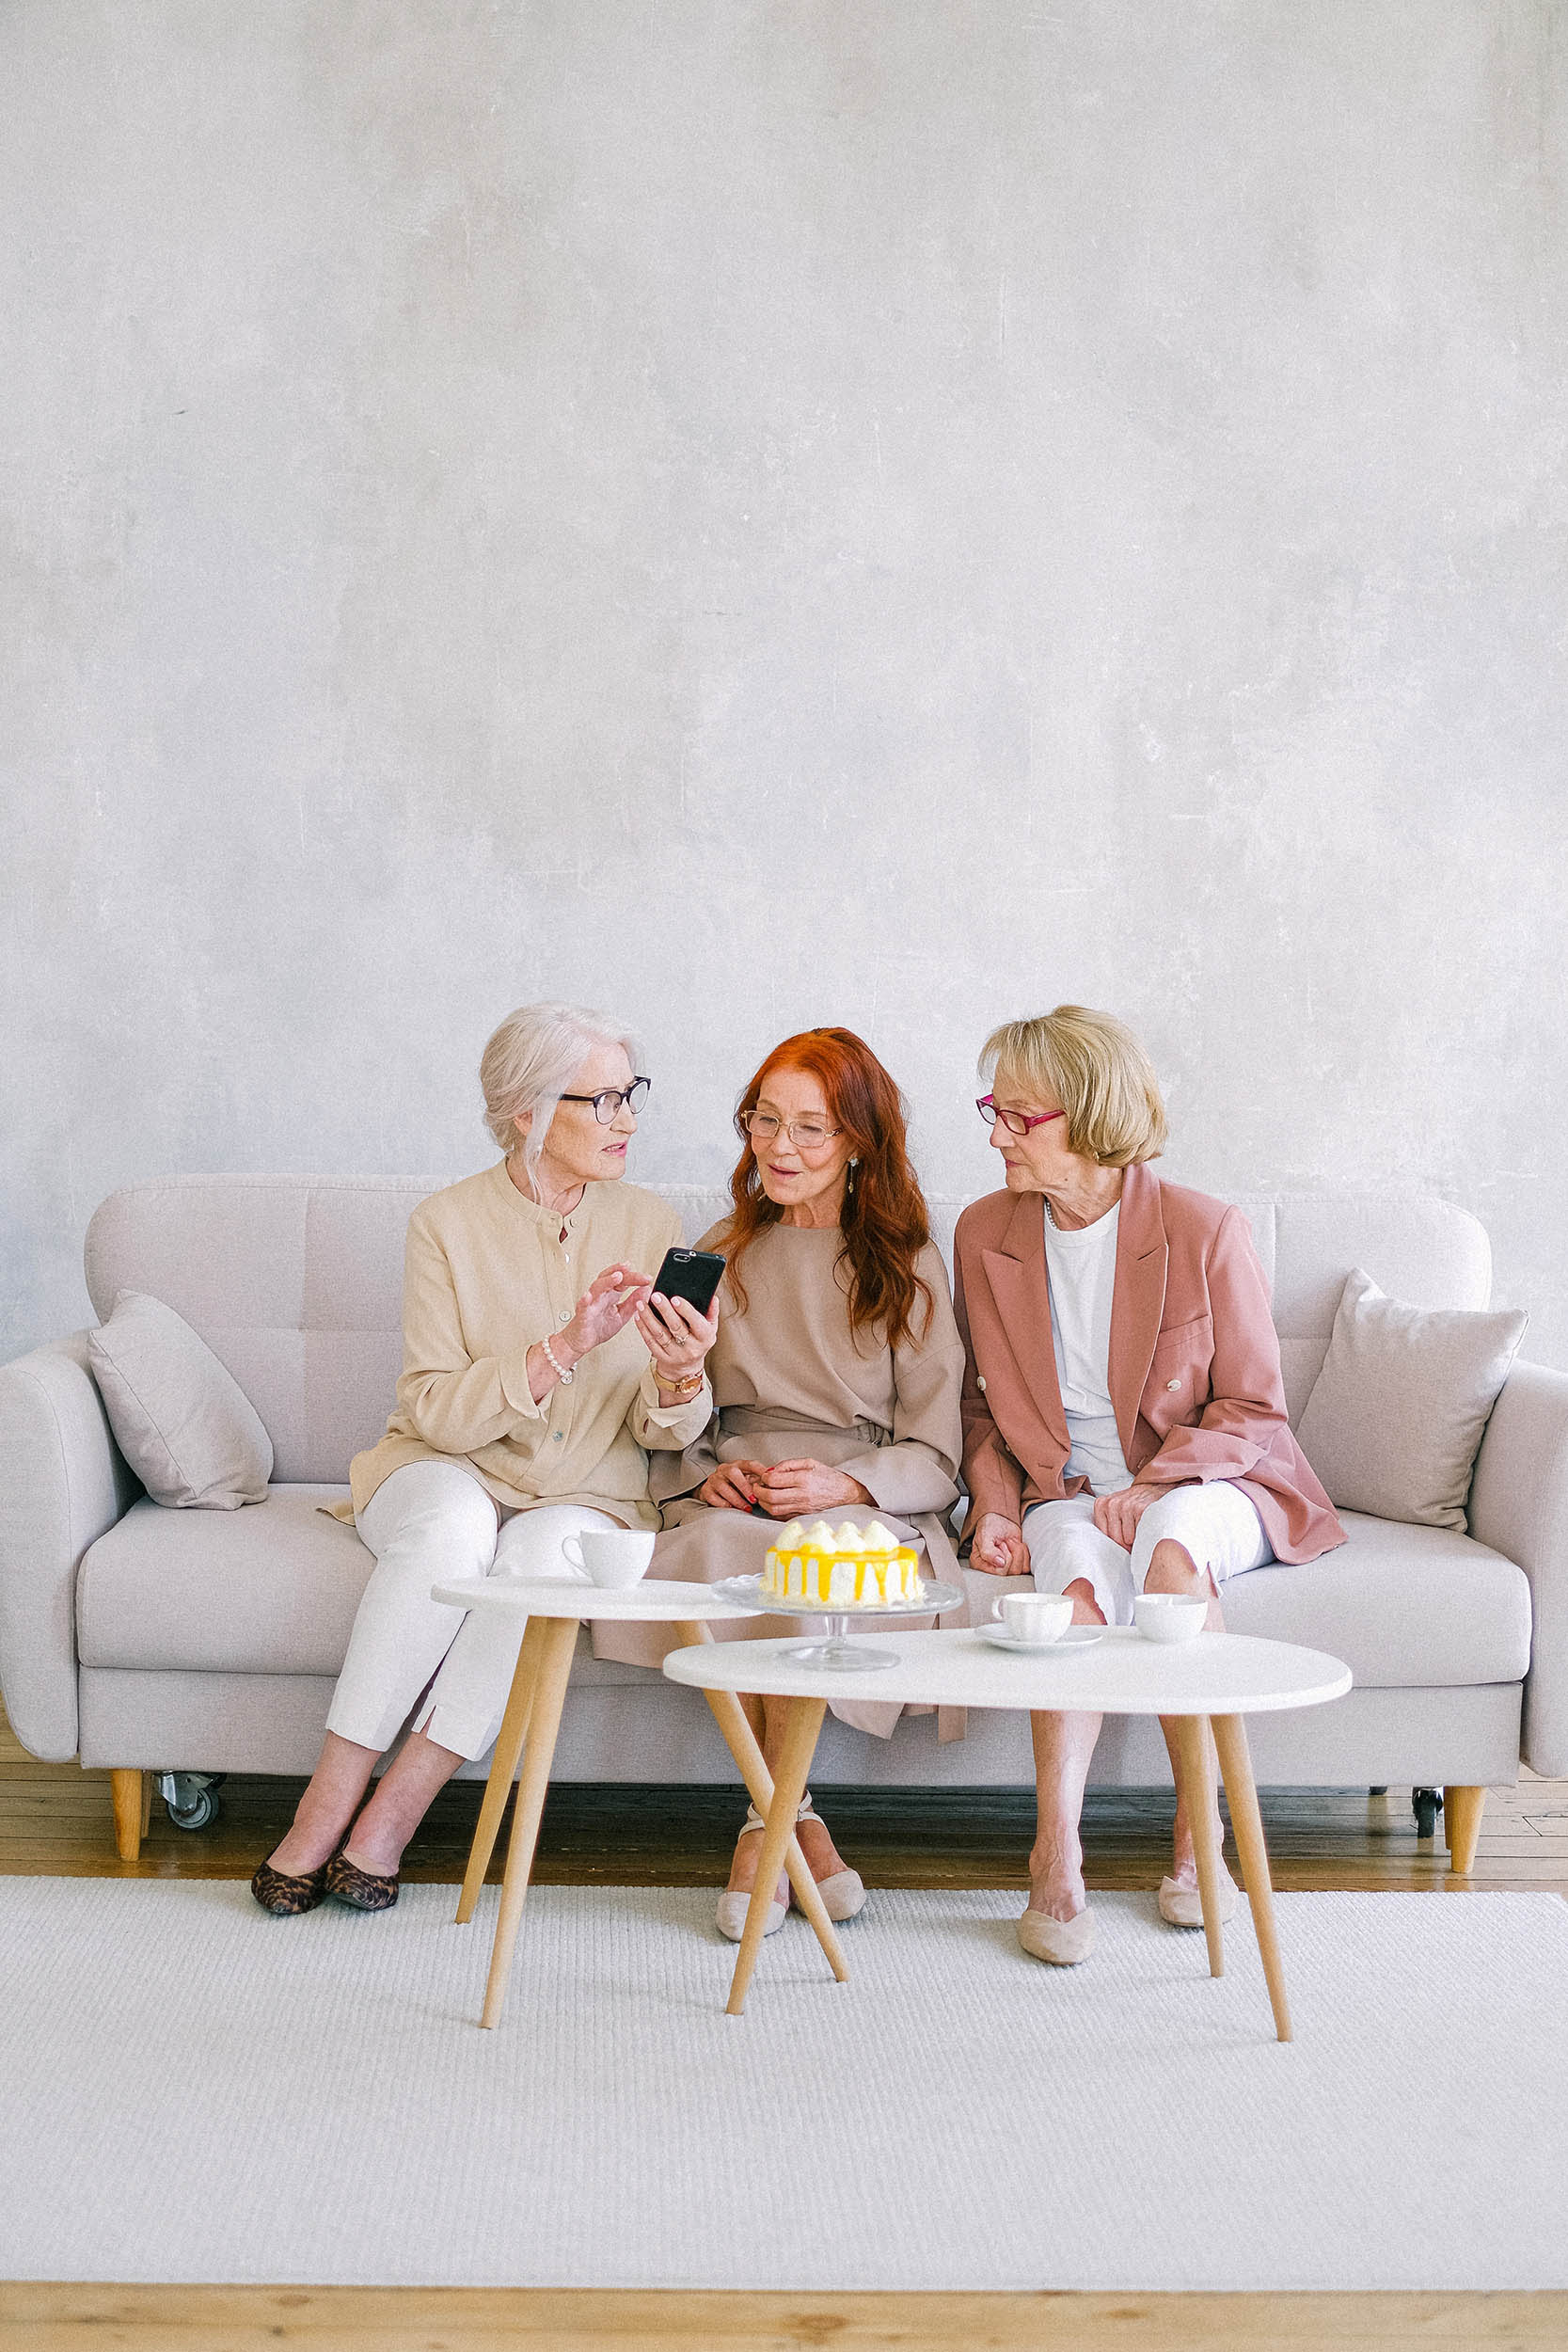 Group of women sitting on a couch having tea and cake